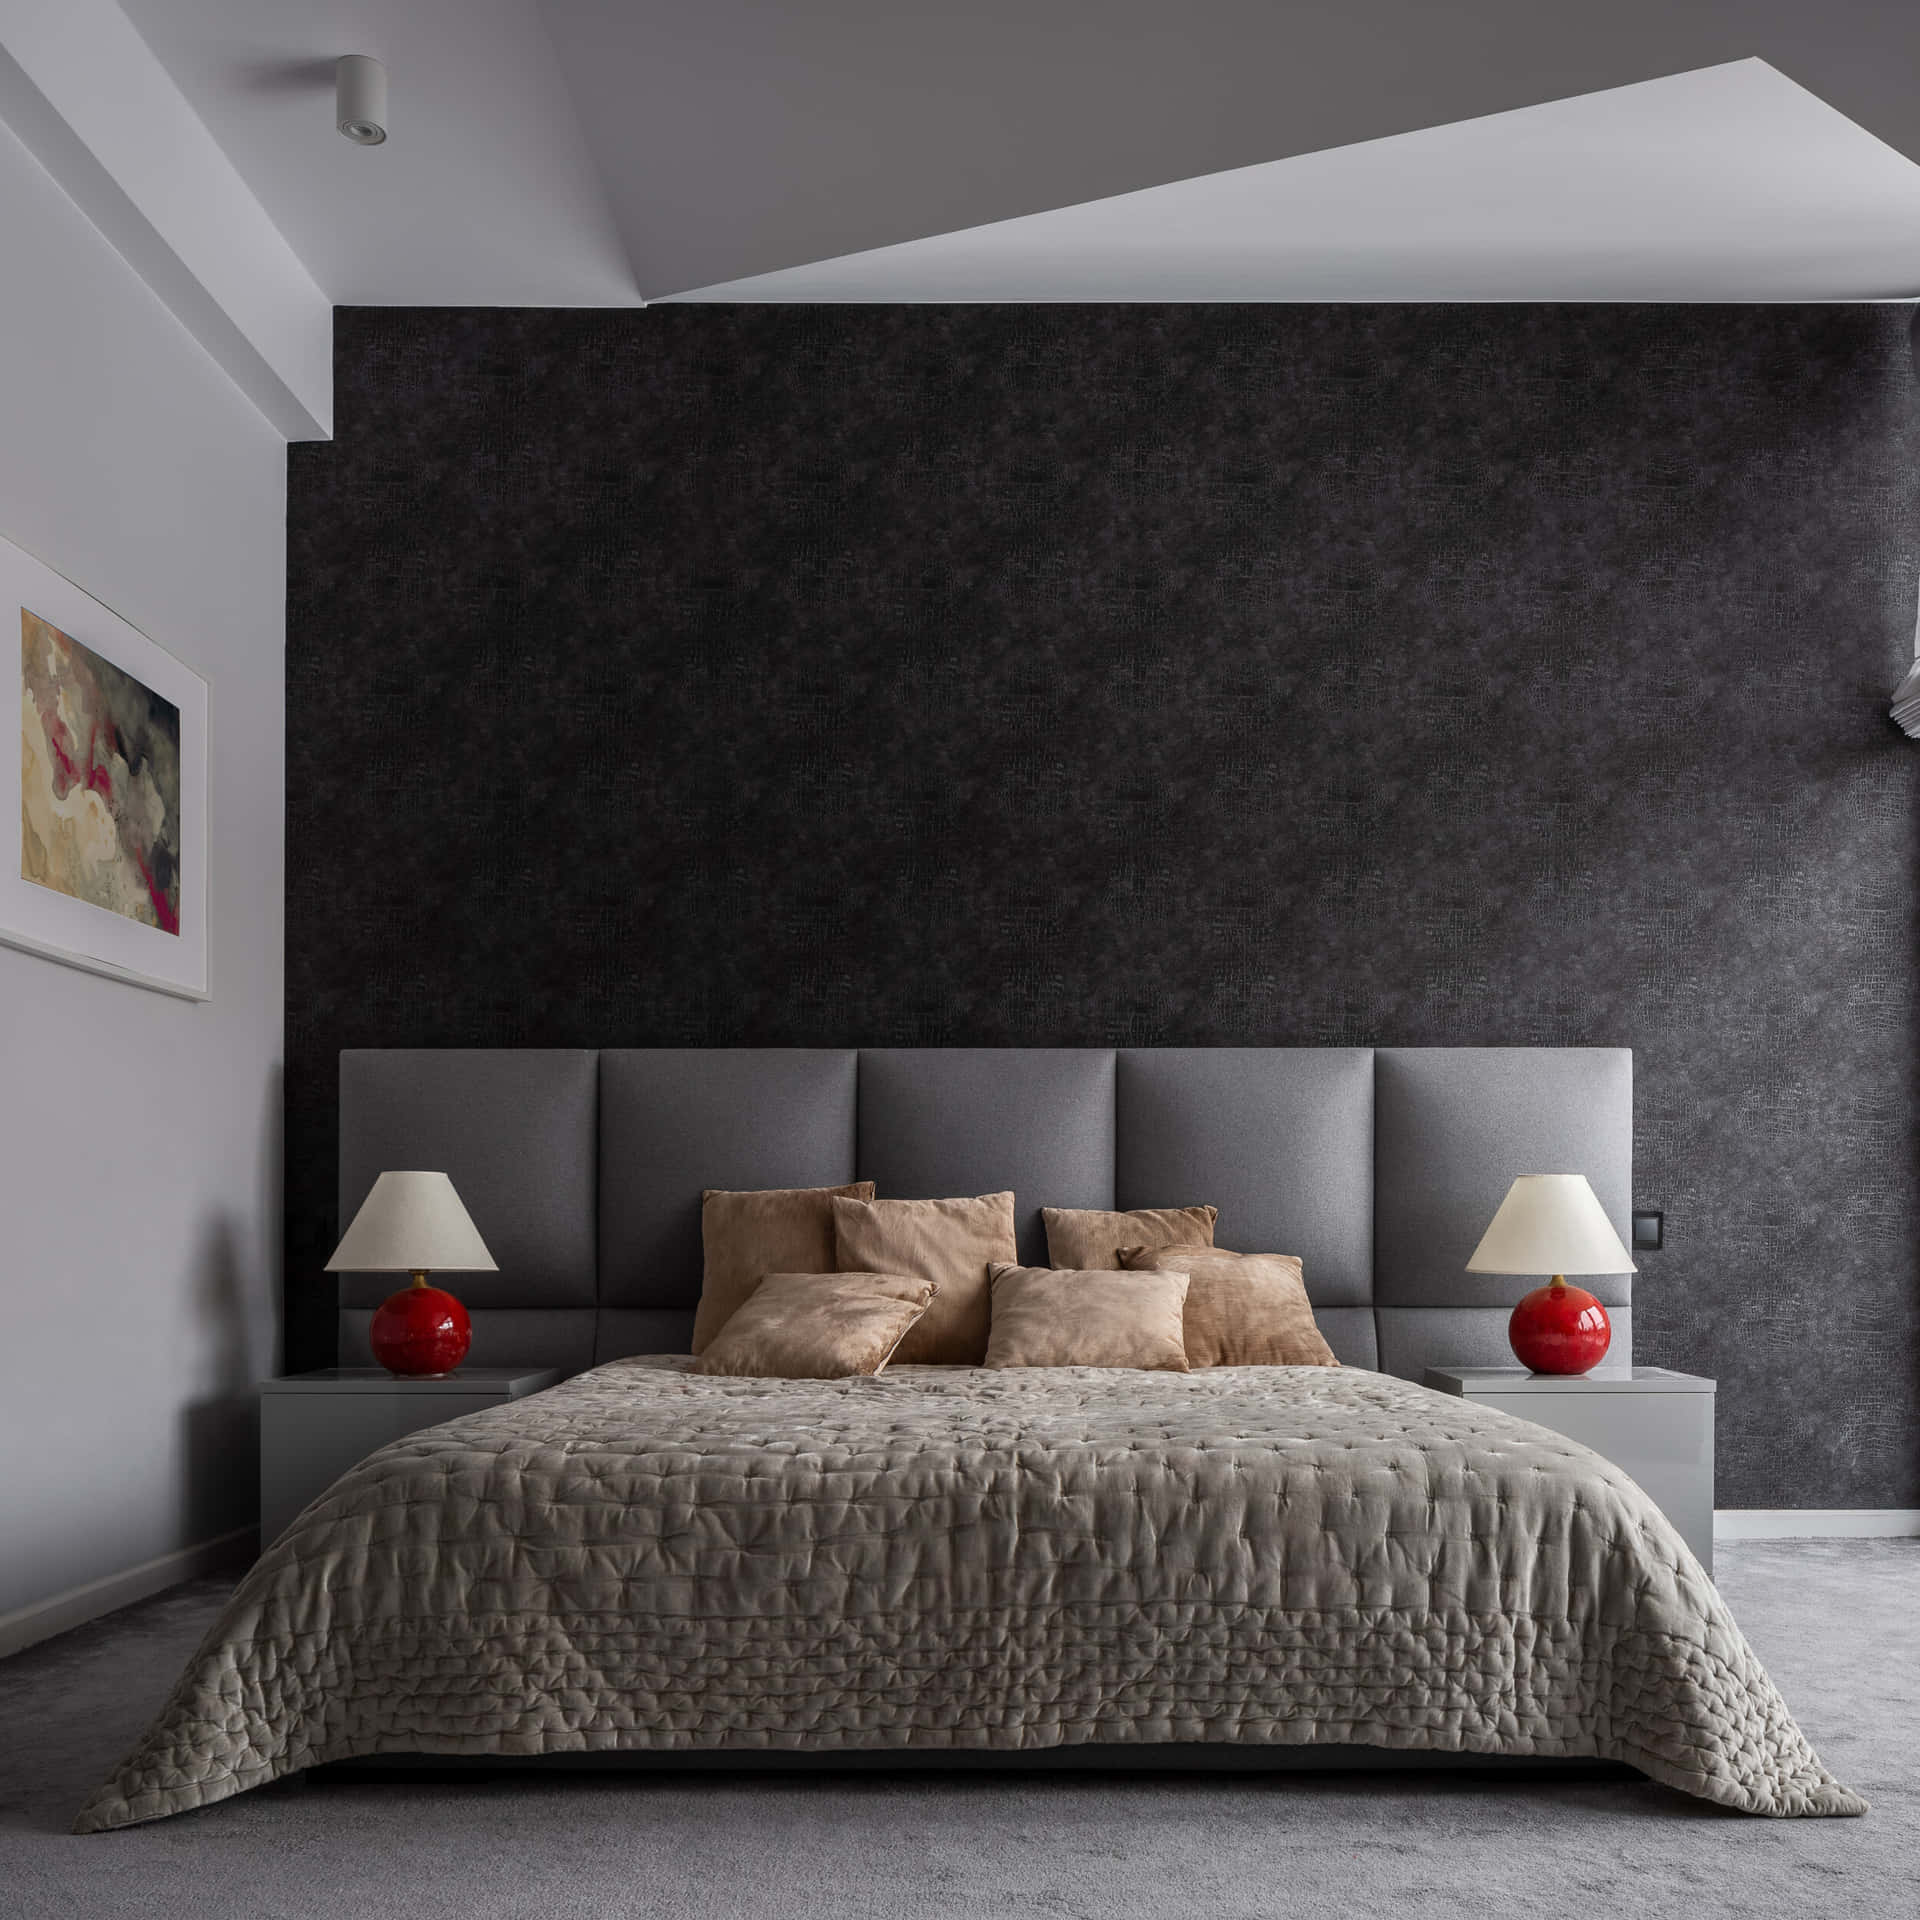 Sophisticated Queen Size Bed In Dark Ambiance Background